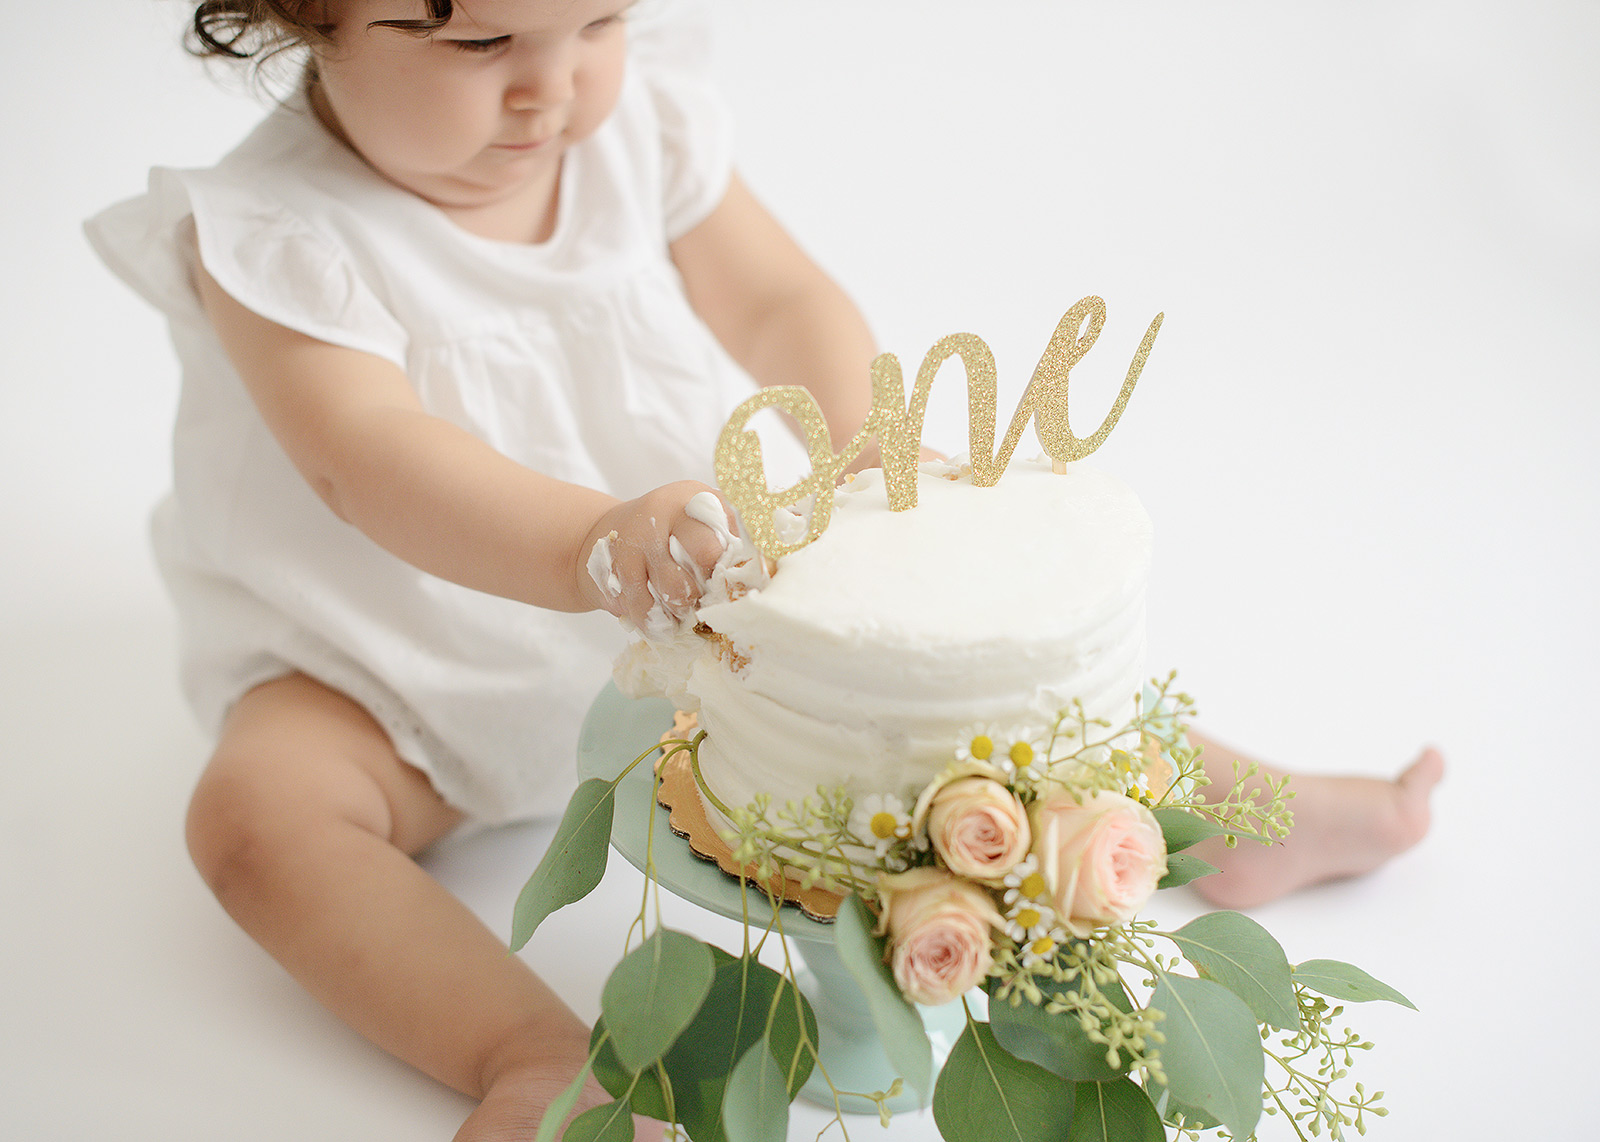 Baby Girl One Year Cake Smash with Flowers